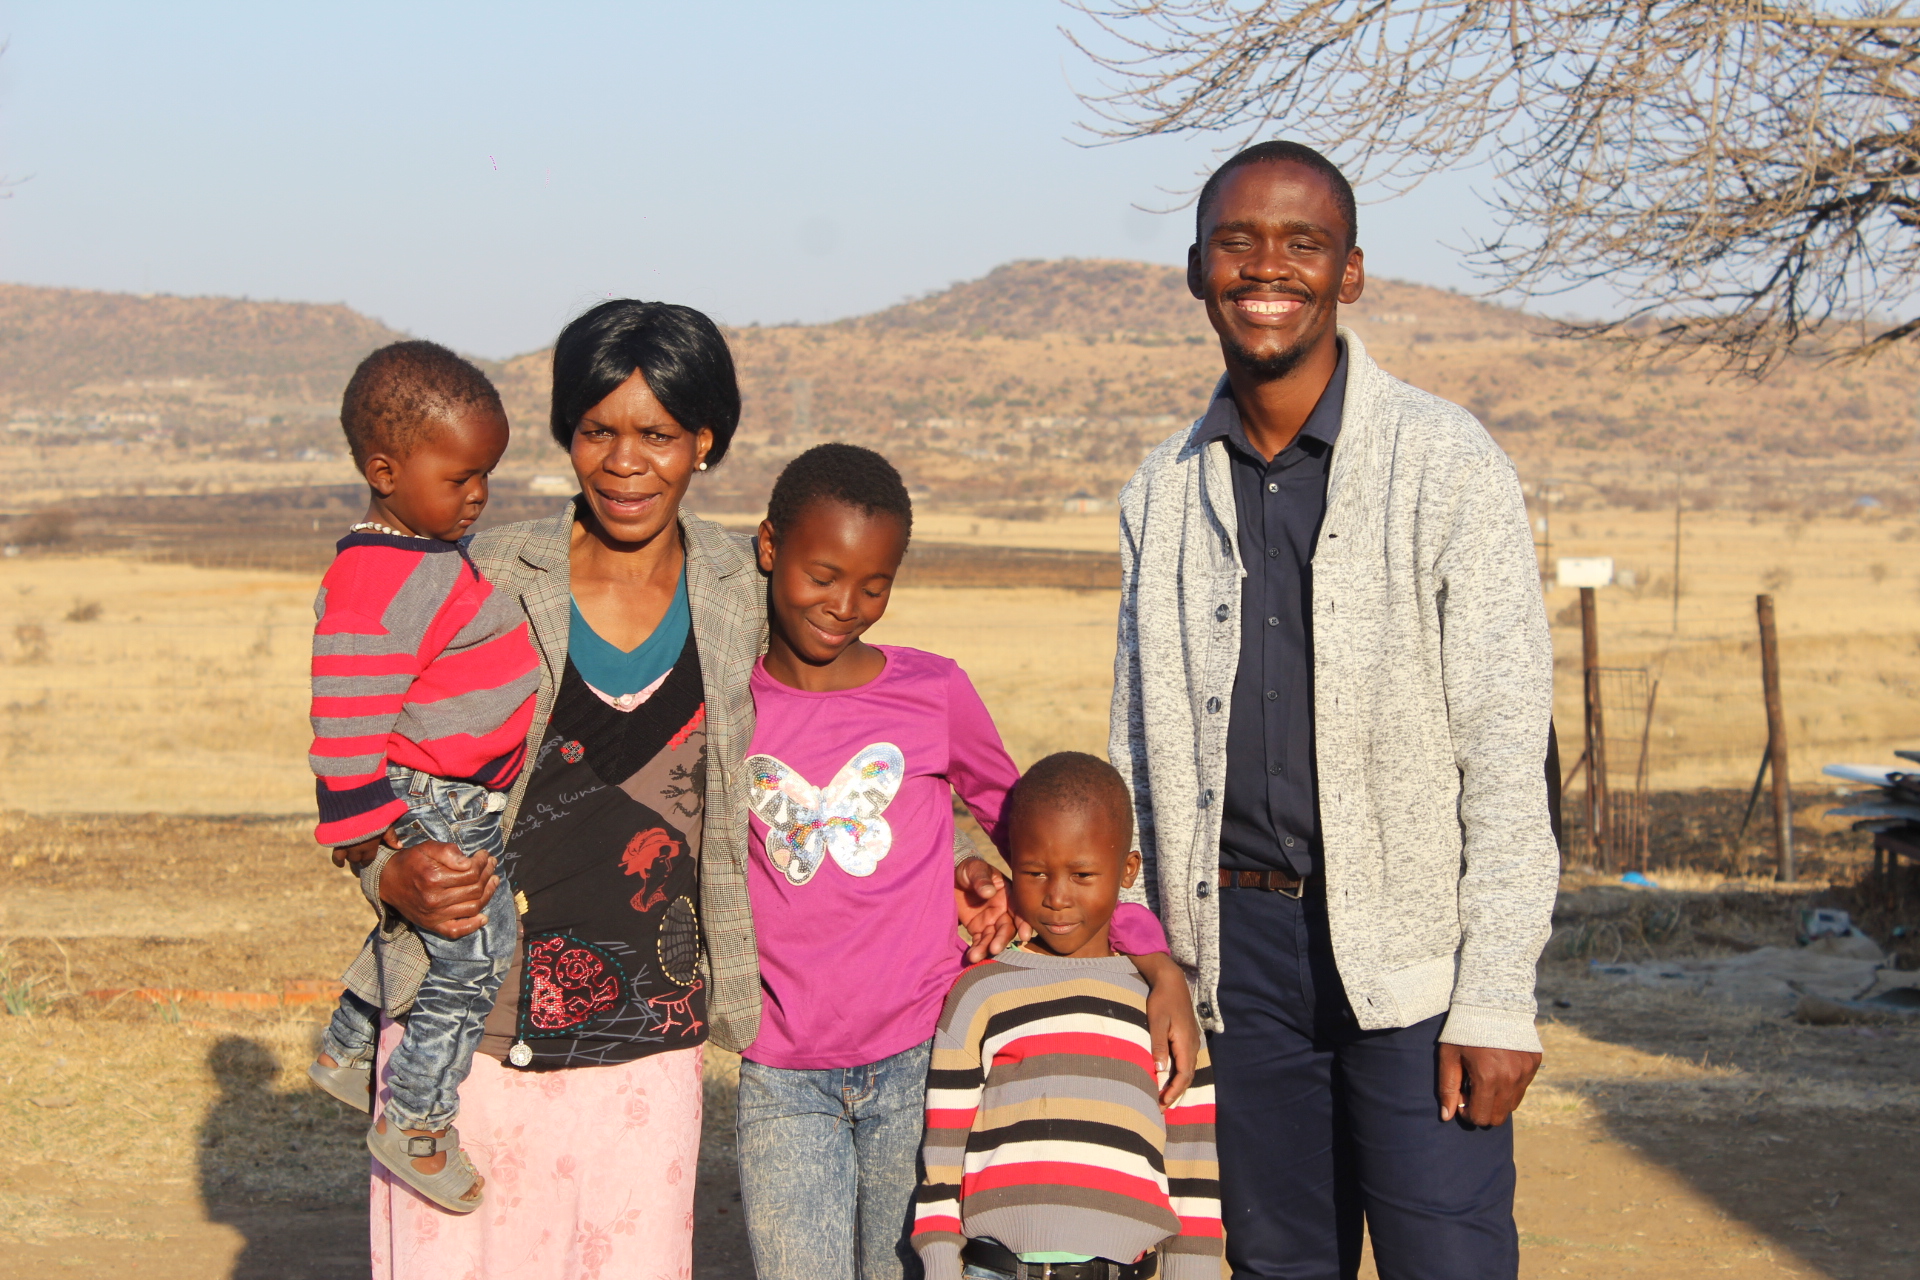 Children, Amahle and Siyanda, with their aunt